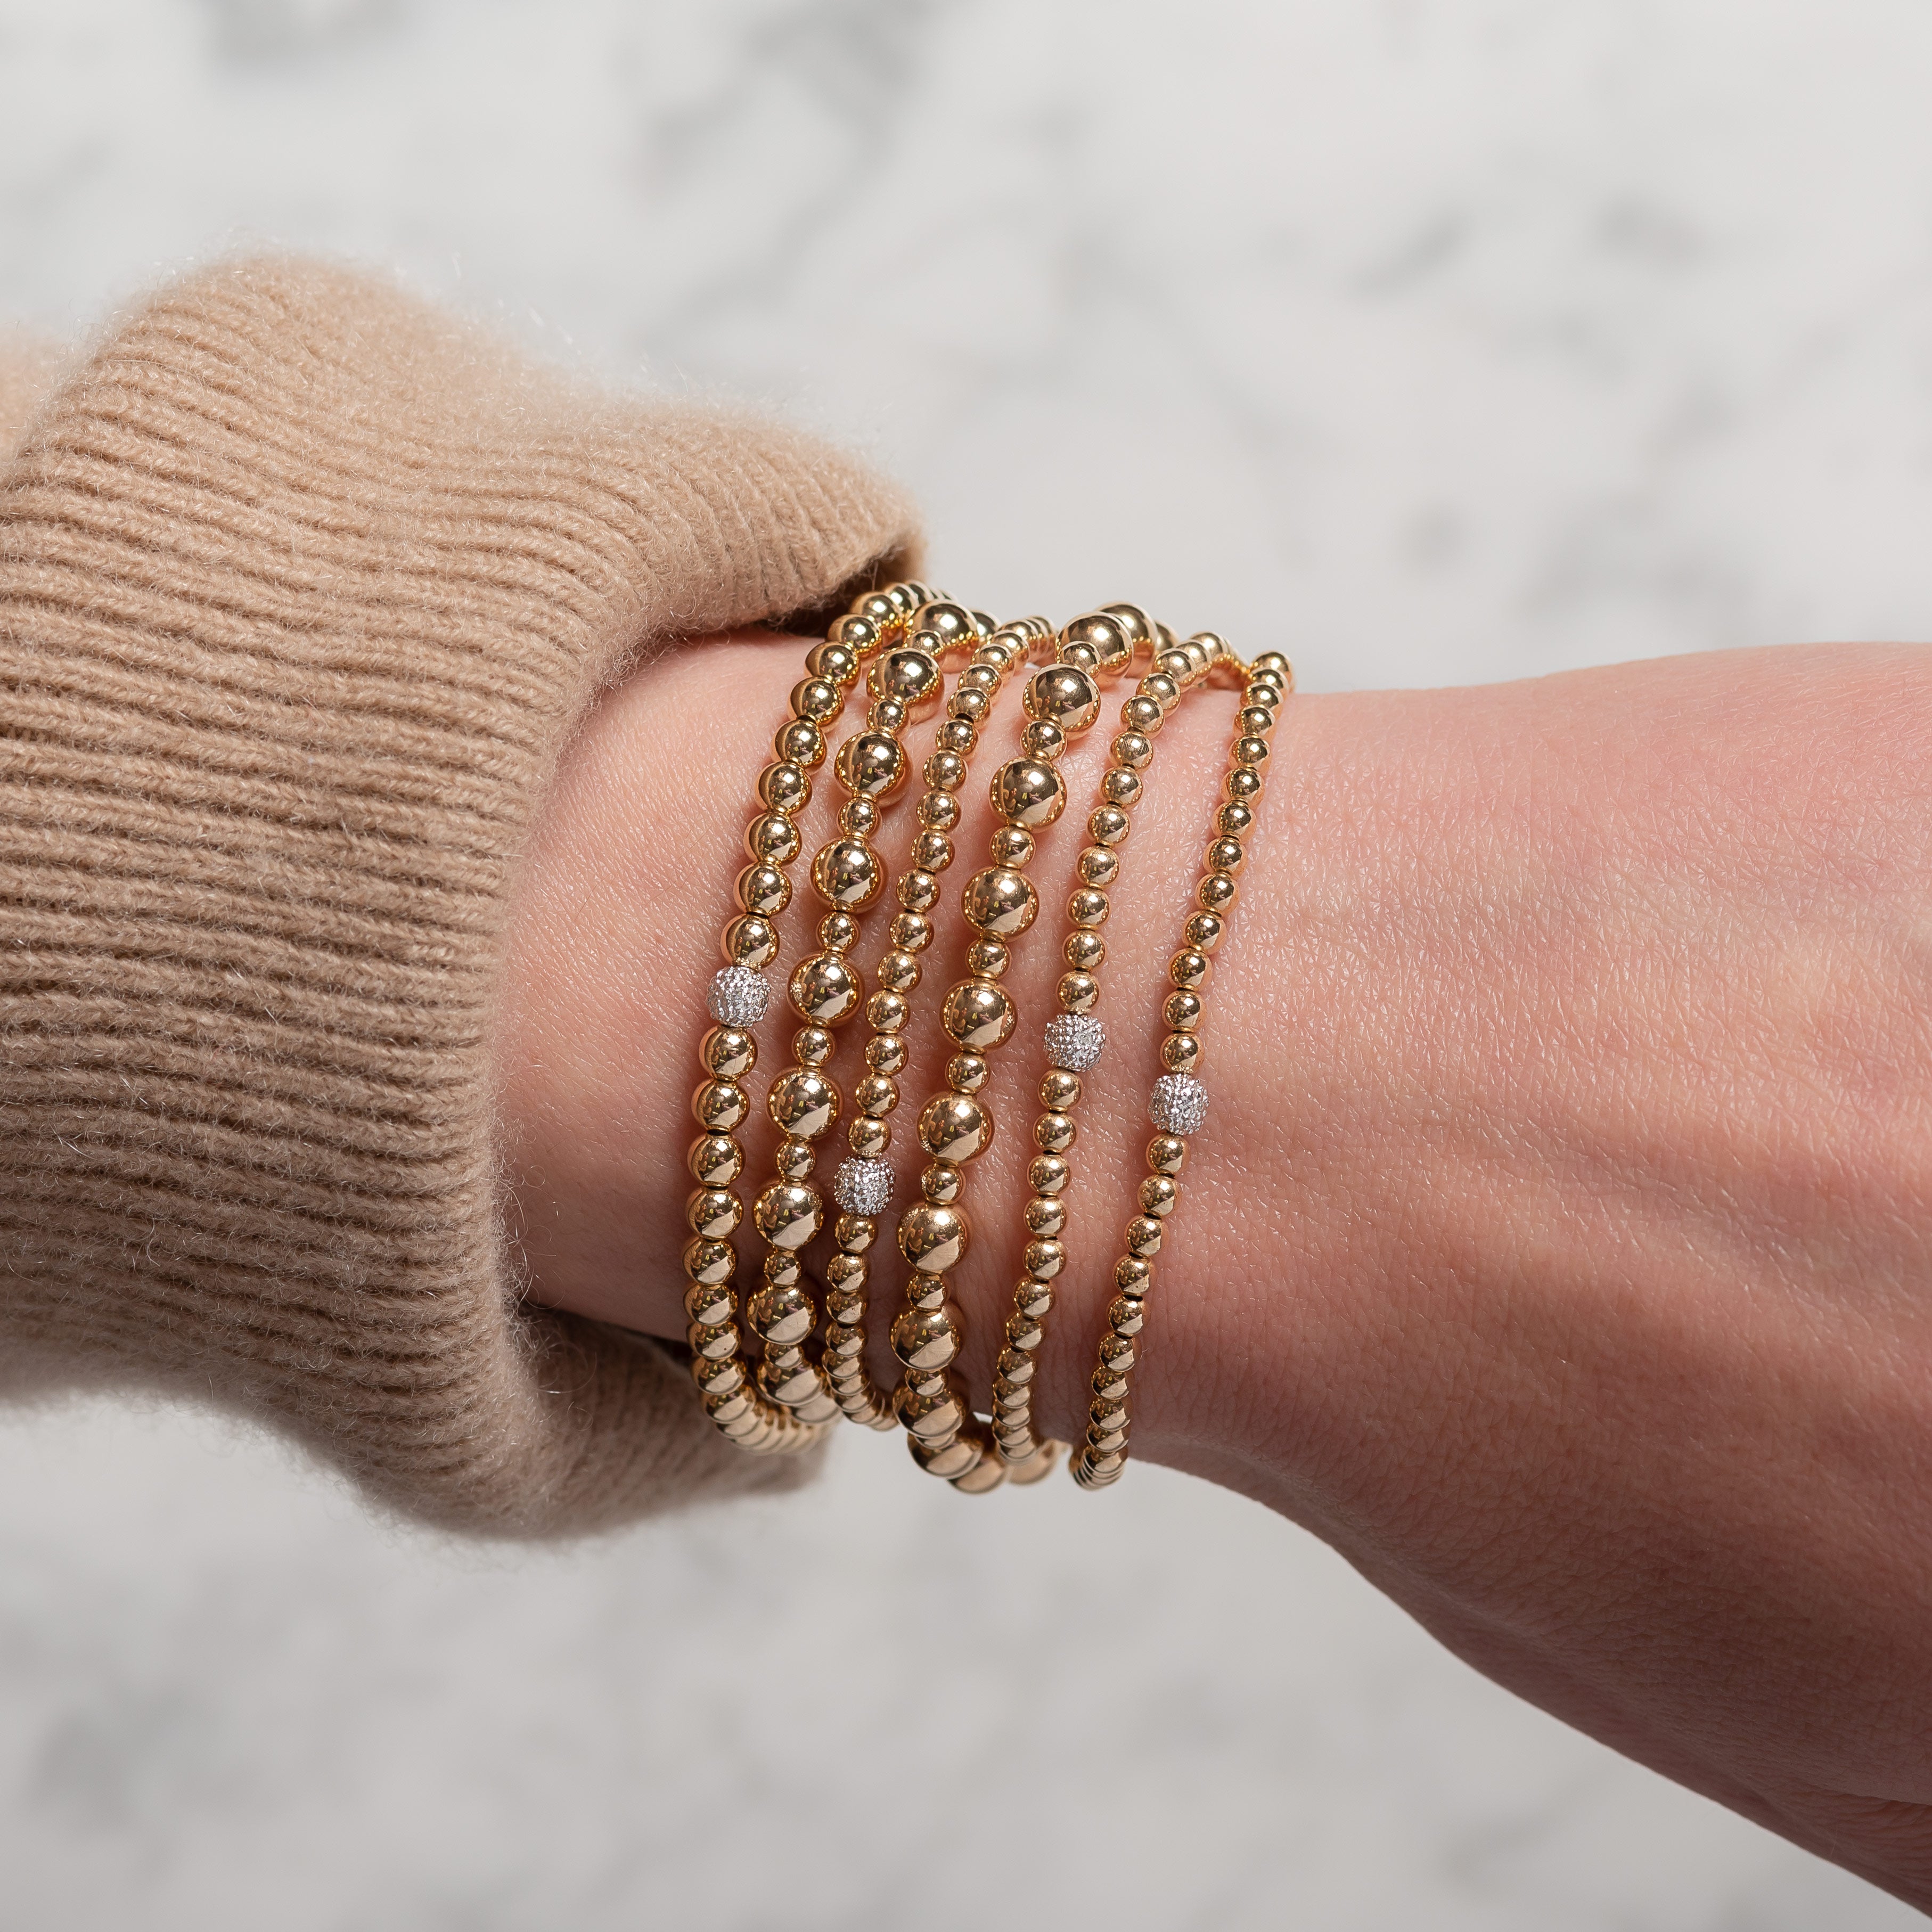 Simple Stacking Beaded Bracelet - Silver & 9ct Gold Filled – Tomm Jewellery